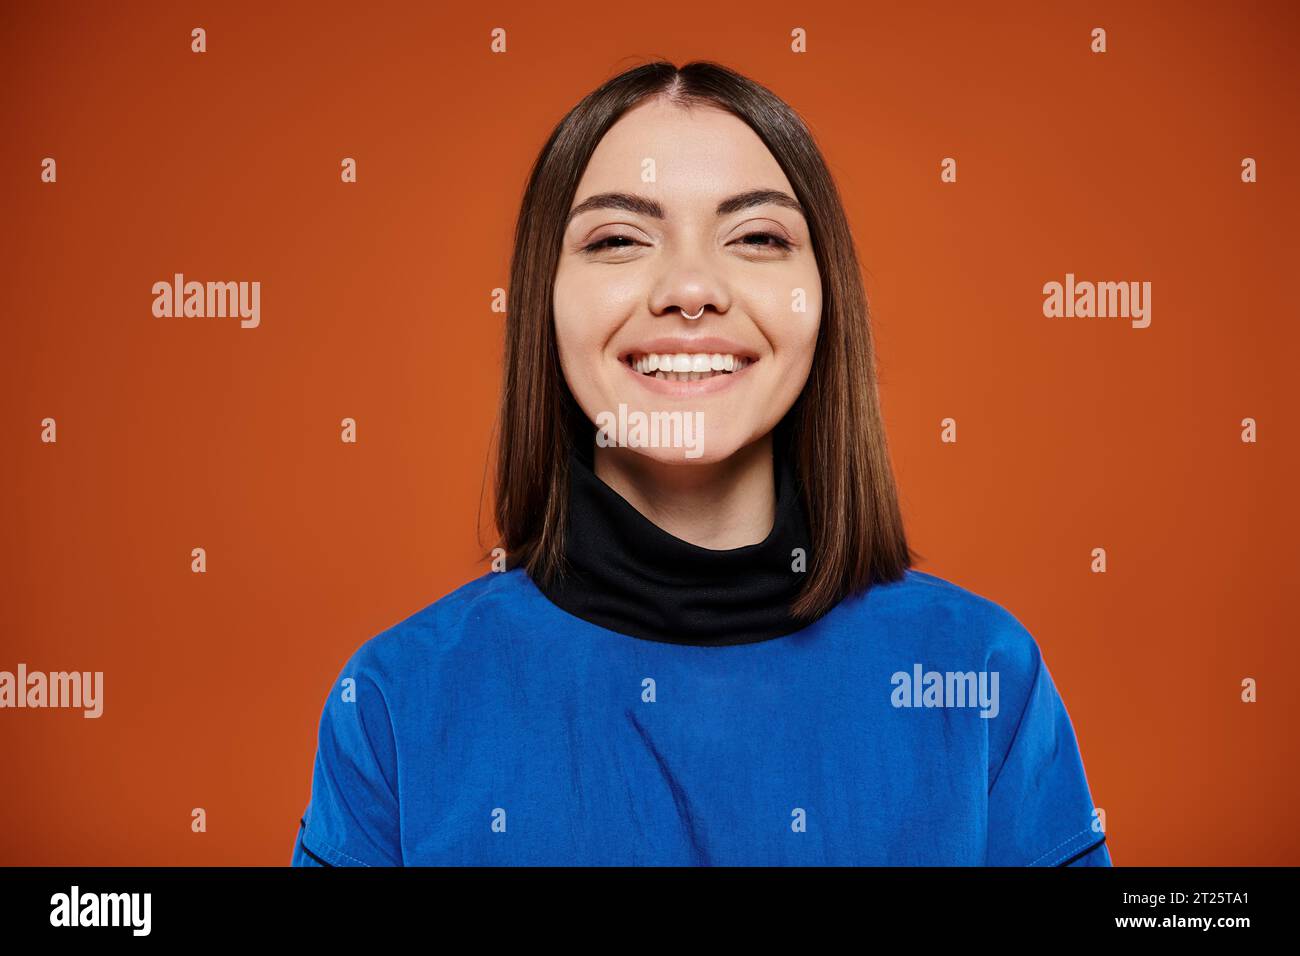 happy young woman with pierced nose looking at camera and smiling on orange backdrop, blue jacket Stock Photo